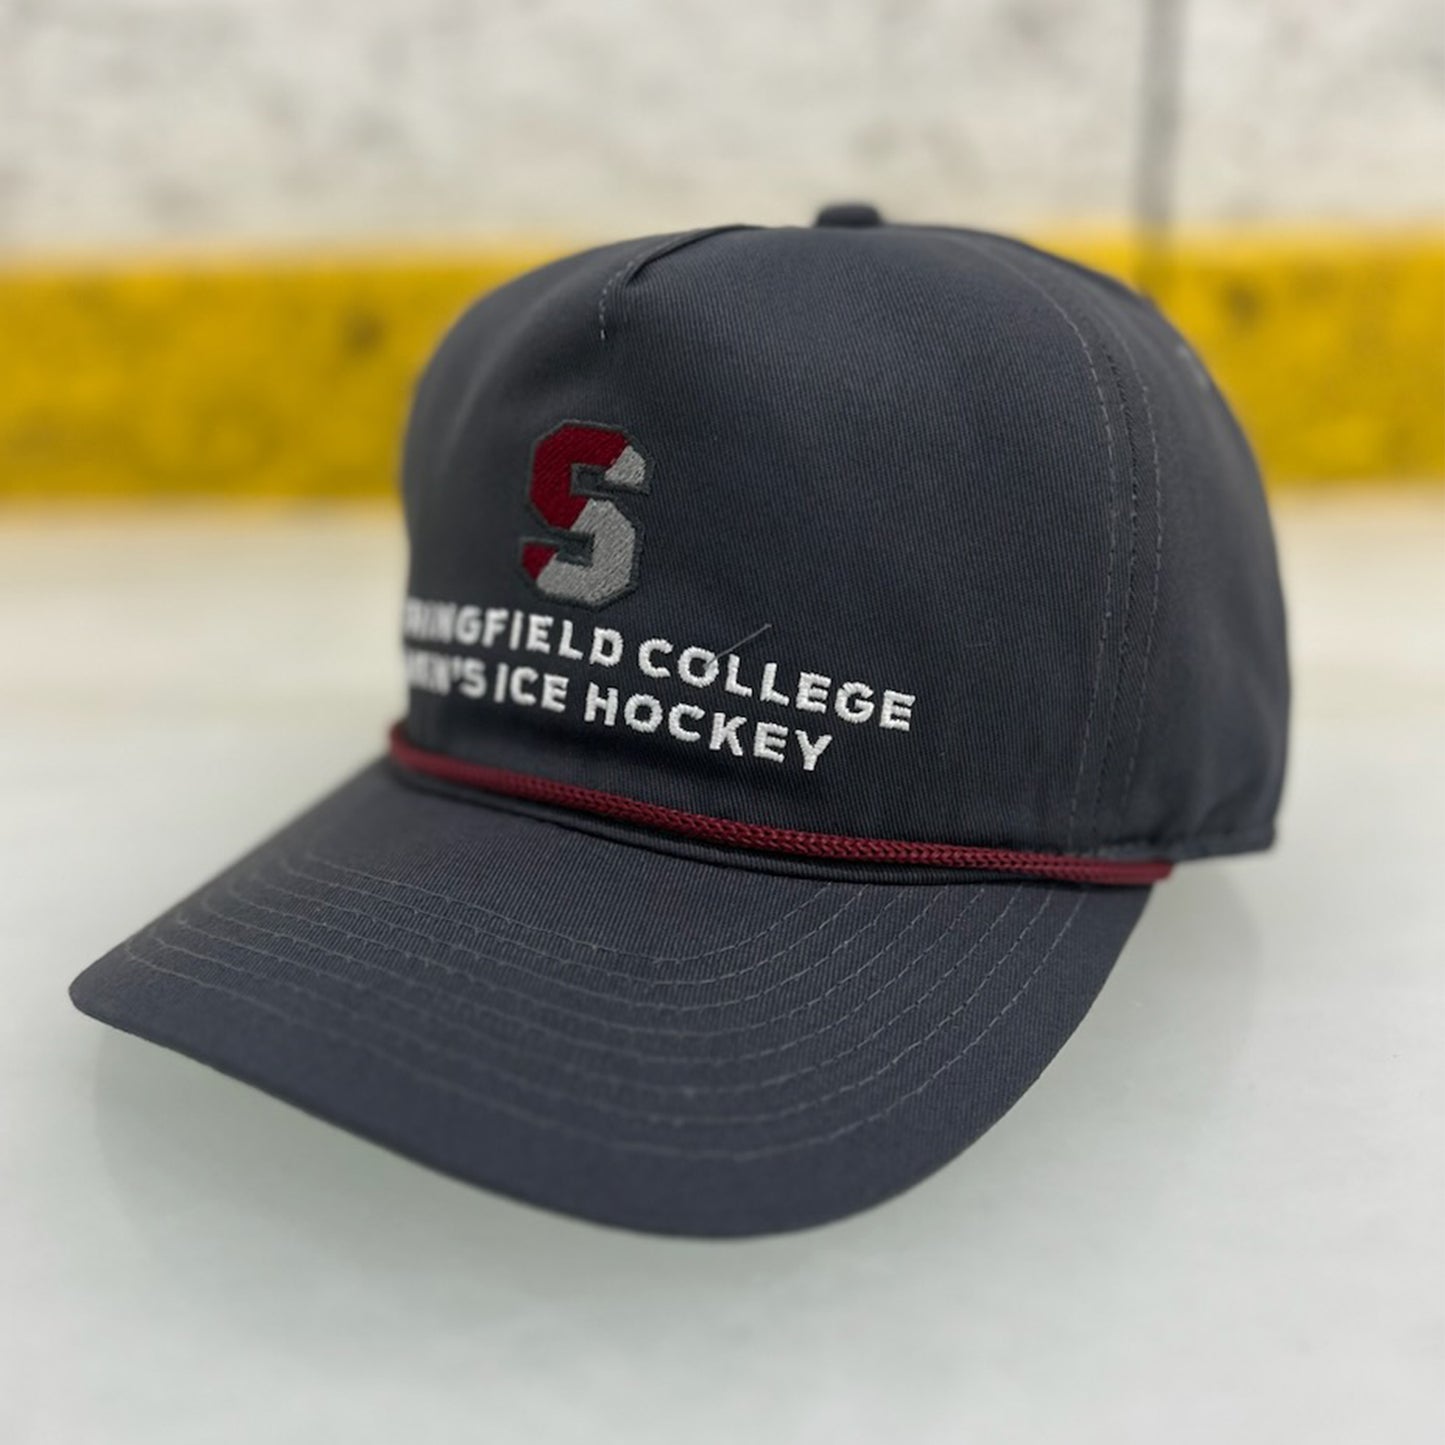 Springfield College Club Hockey Celly Co. Hat